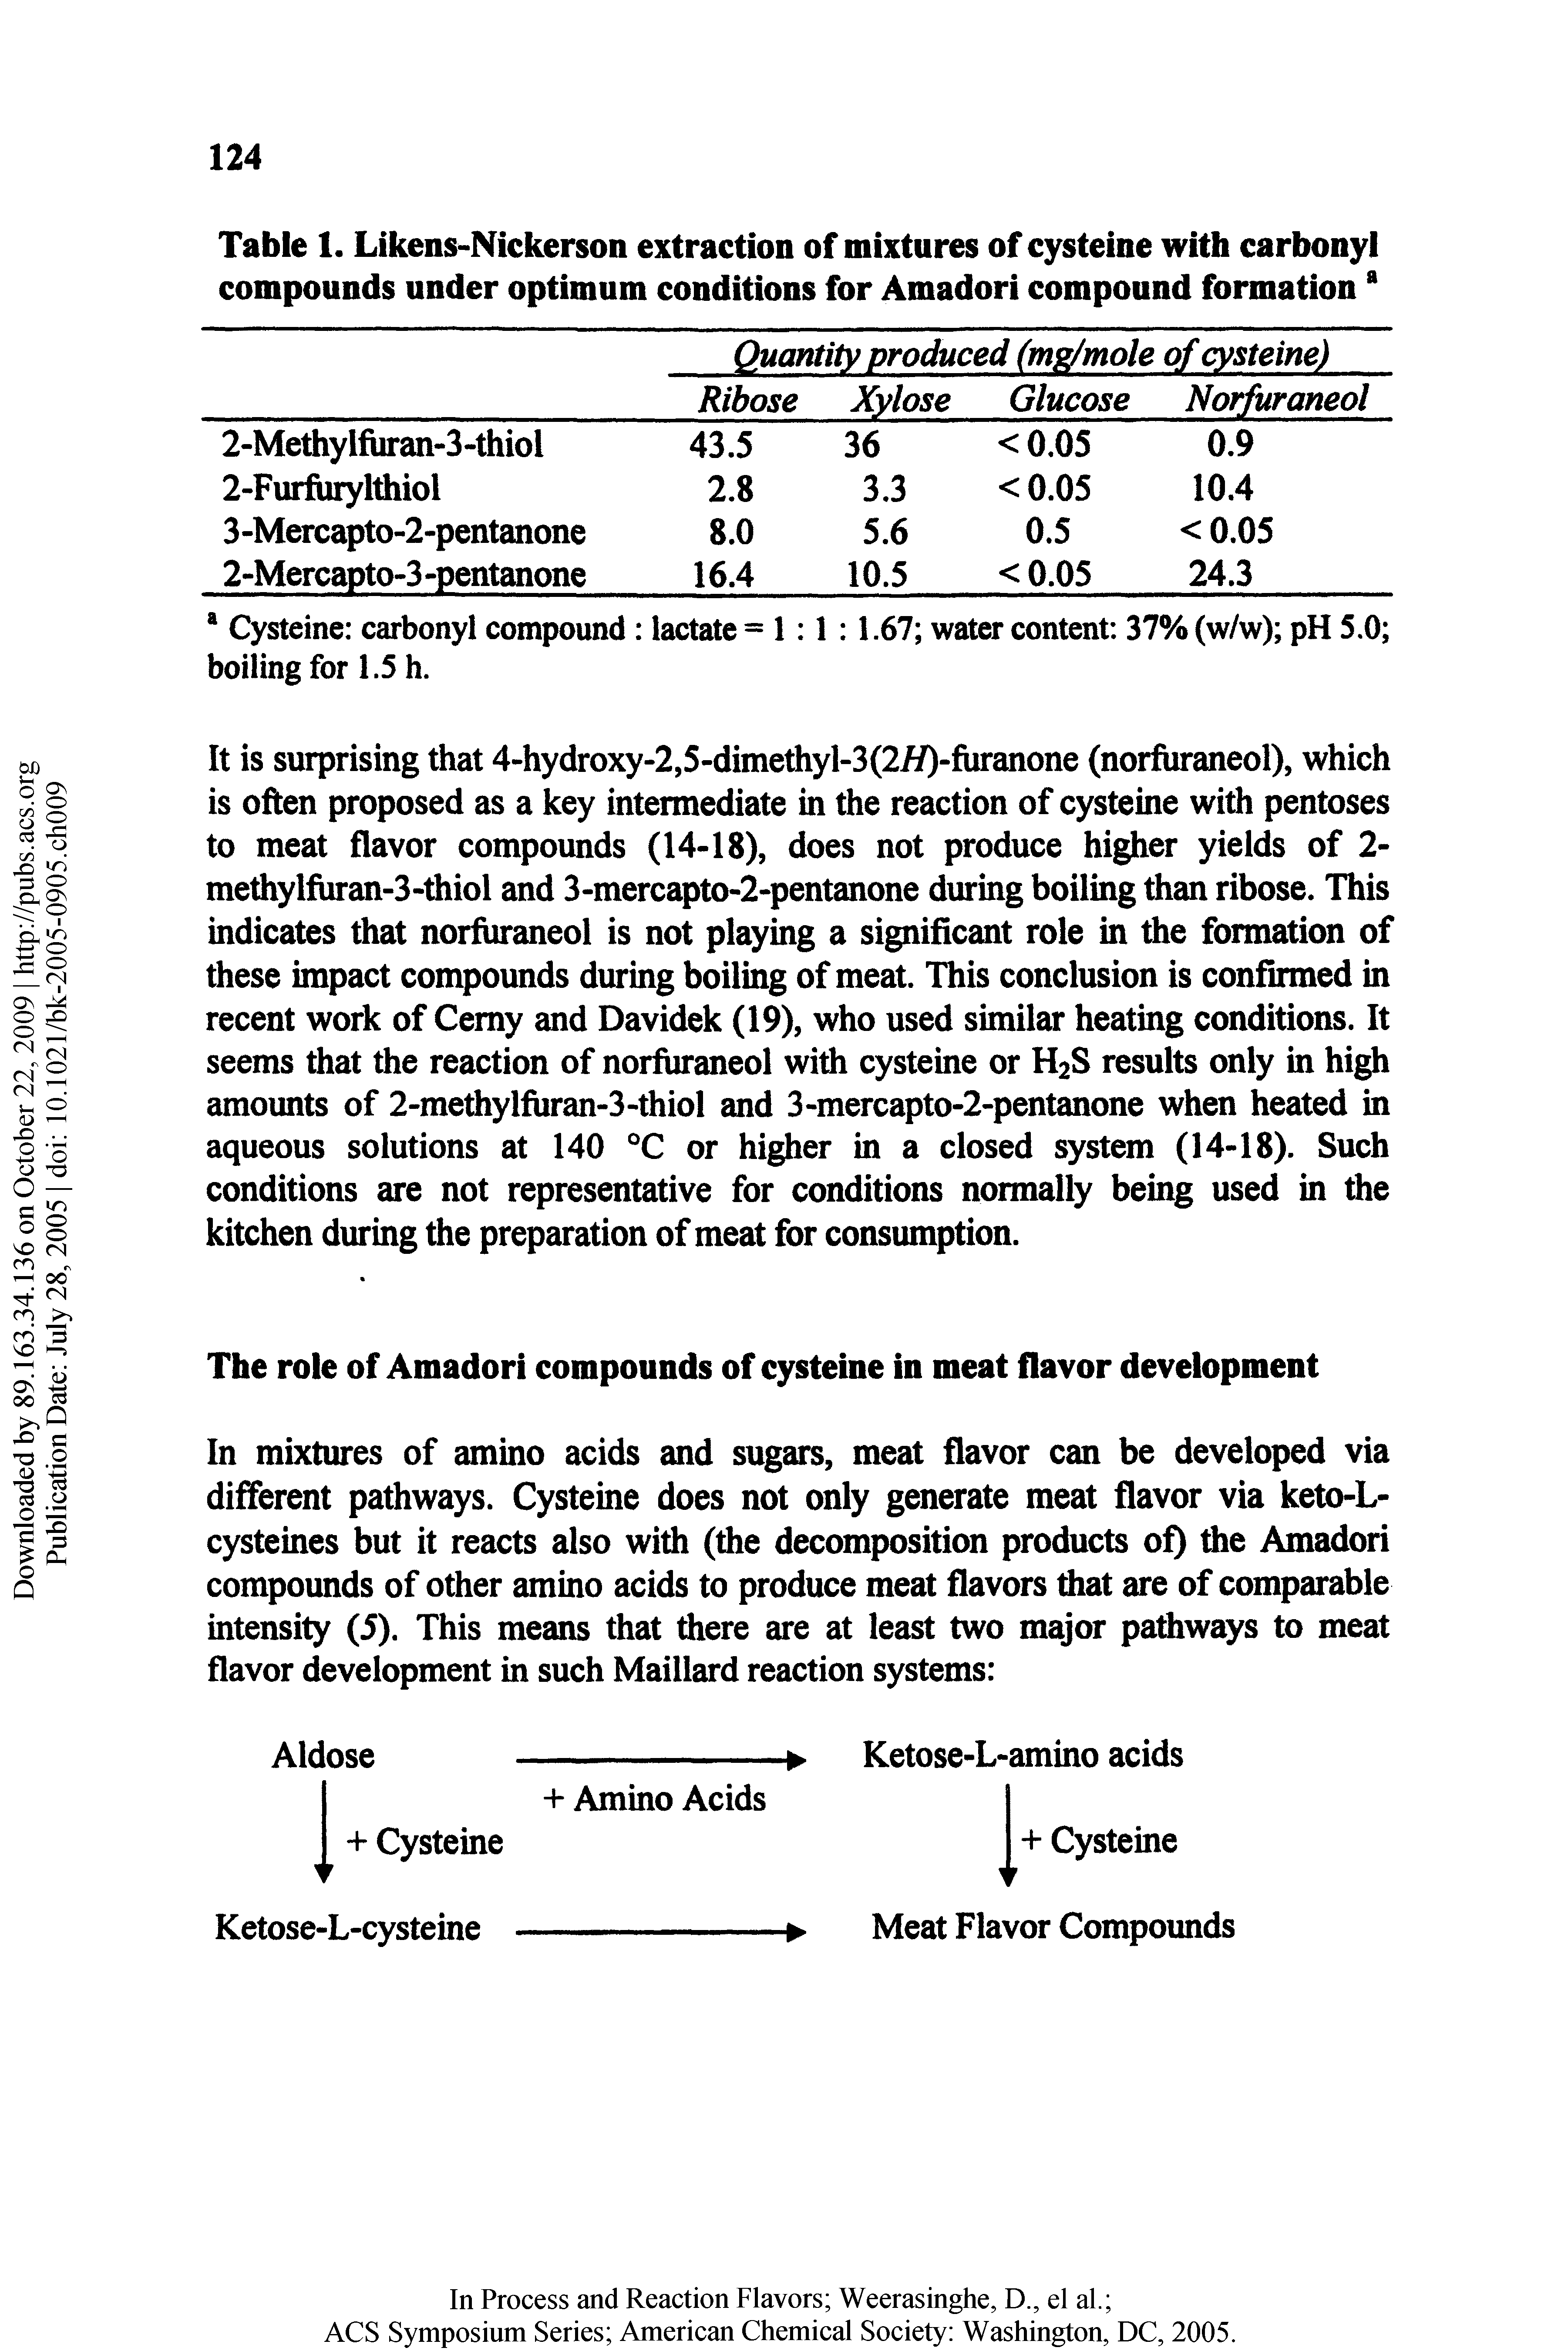 Table 1. Likens-Nickerson extraction of mixtures of cysteine with carbonyl compounds under optimum conditions for Amadori compound formation ...